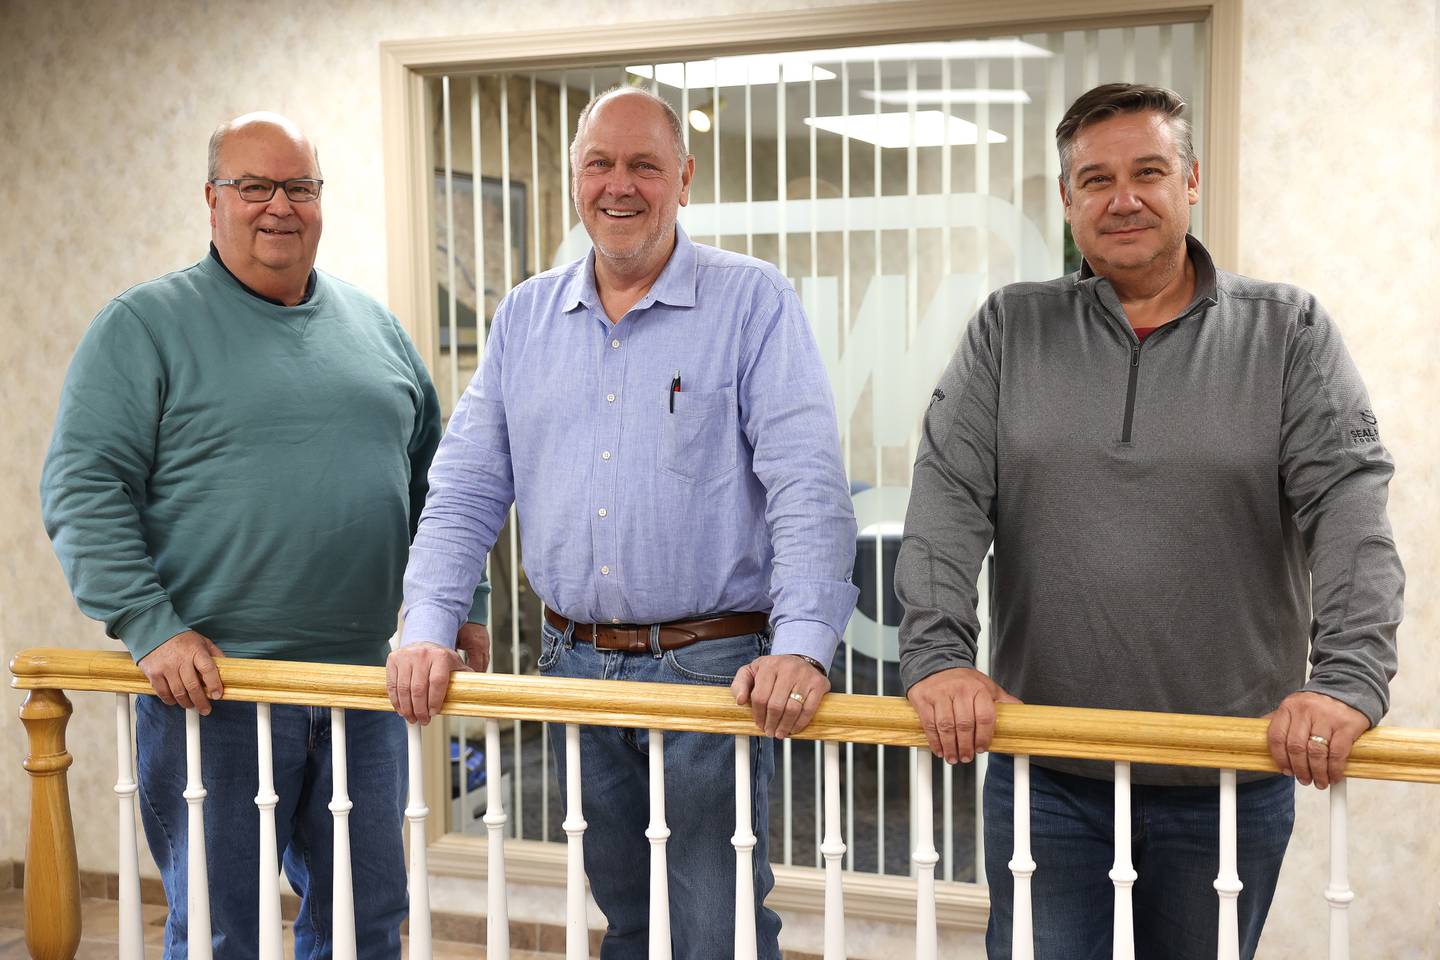 Contractors Association of Will and Grundy Counties Board of Directors Bob Baish, left, Barry Narvick and Jason Cox poses for a photo on Wednesday, Nov. 1, 2023 in Joliet.